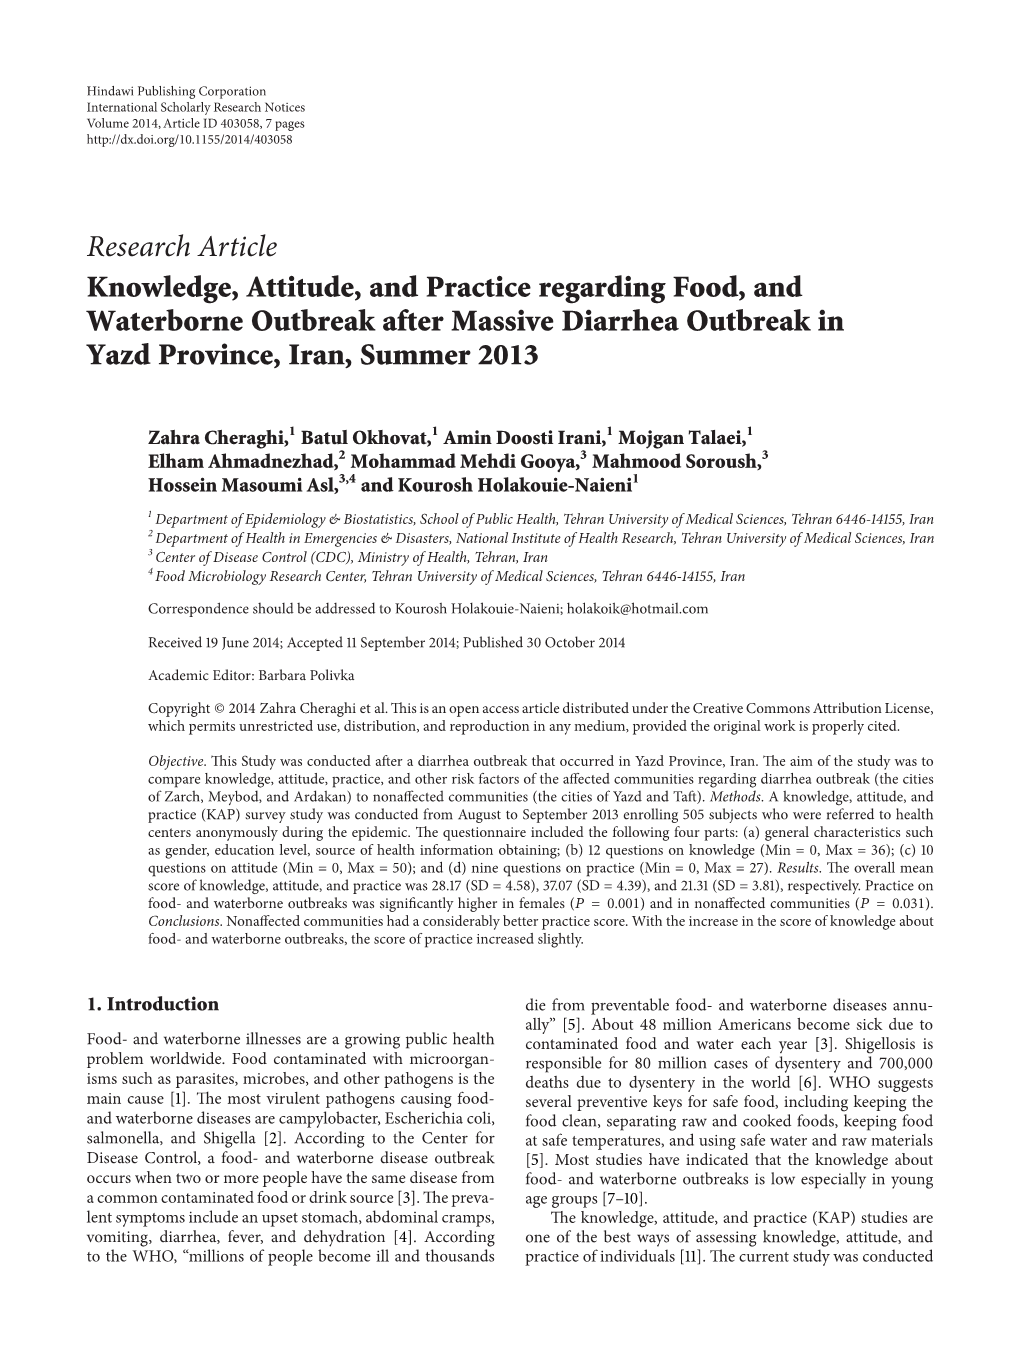 Research Article Knowledge, Attitude, and Practice Regarding Food, and Waterborne Outbreak After Massive Diarrhea Outbreak in Yazd Province, Iran, Summer 2013